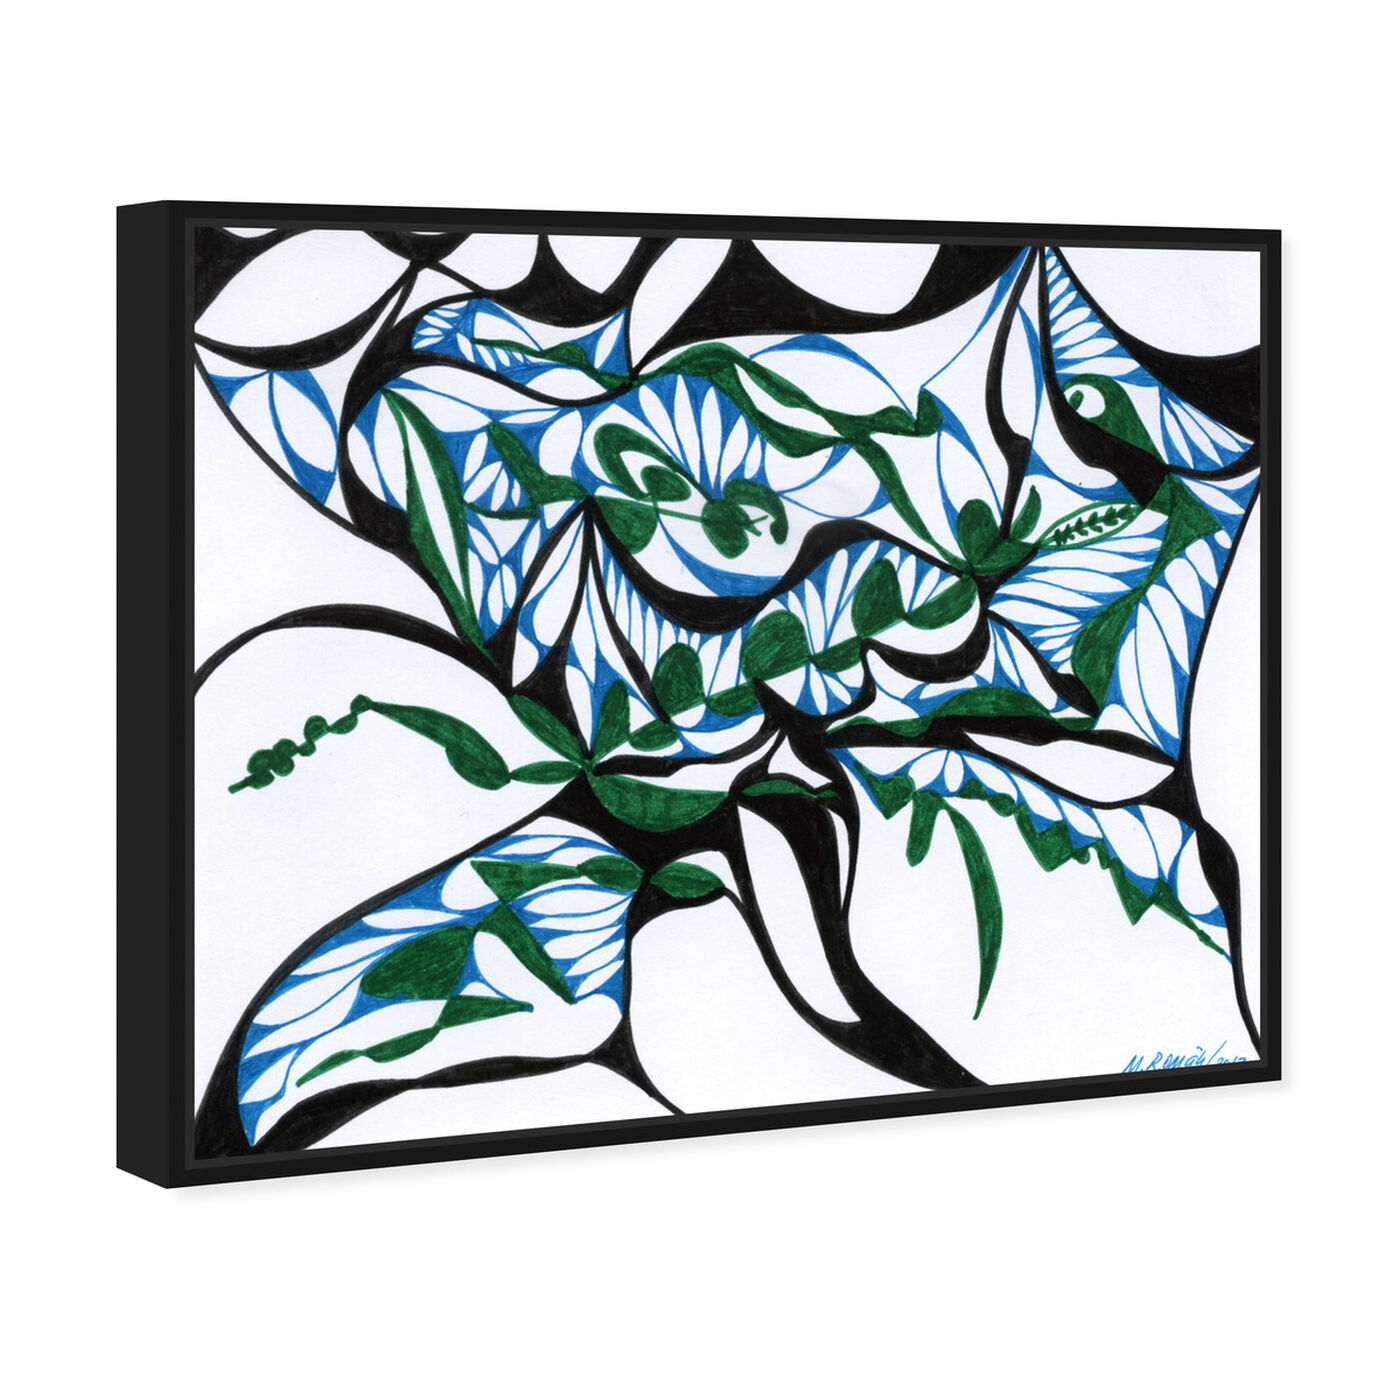 Angled view of Swirling Ferns featuring abstract and geometric art.